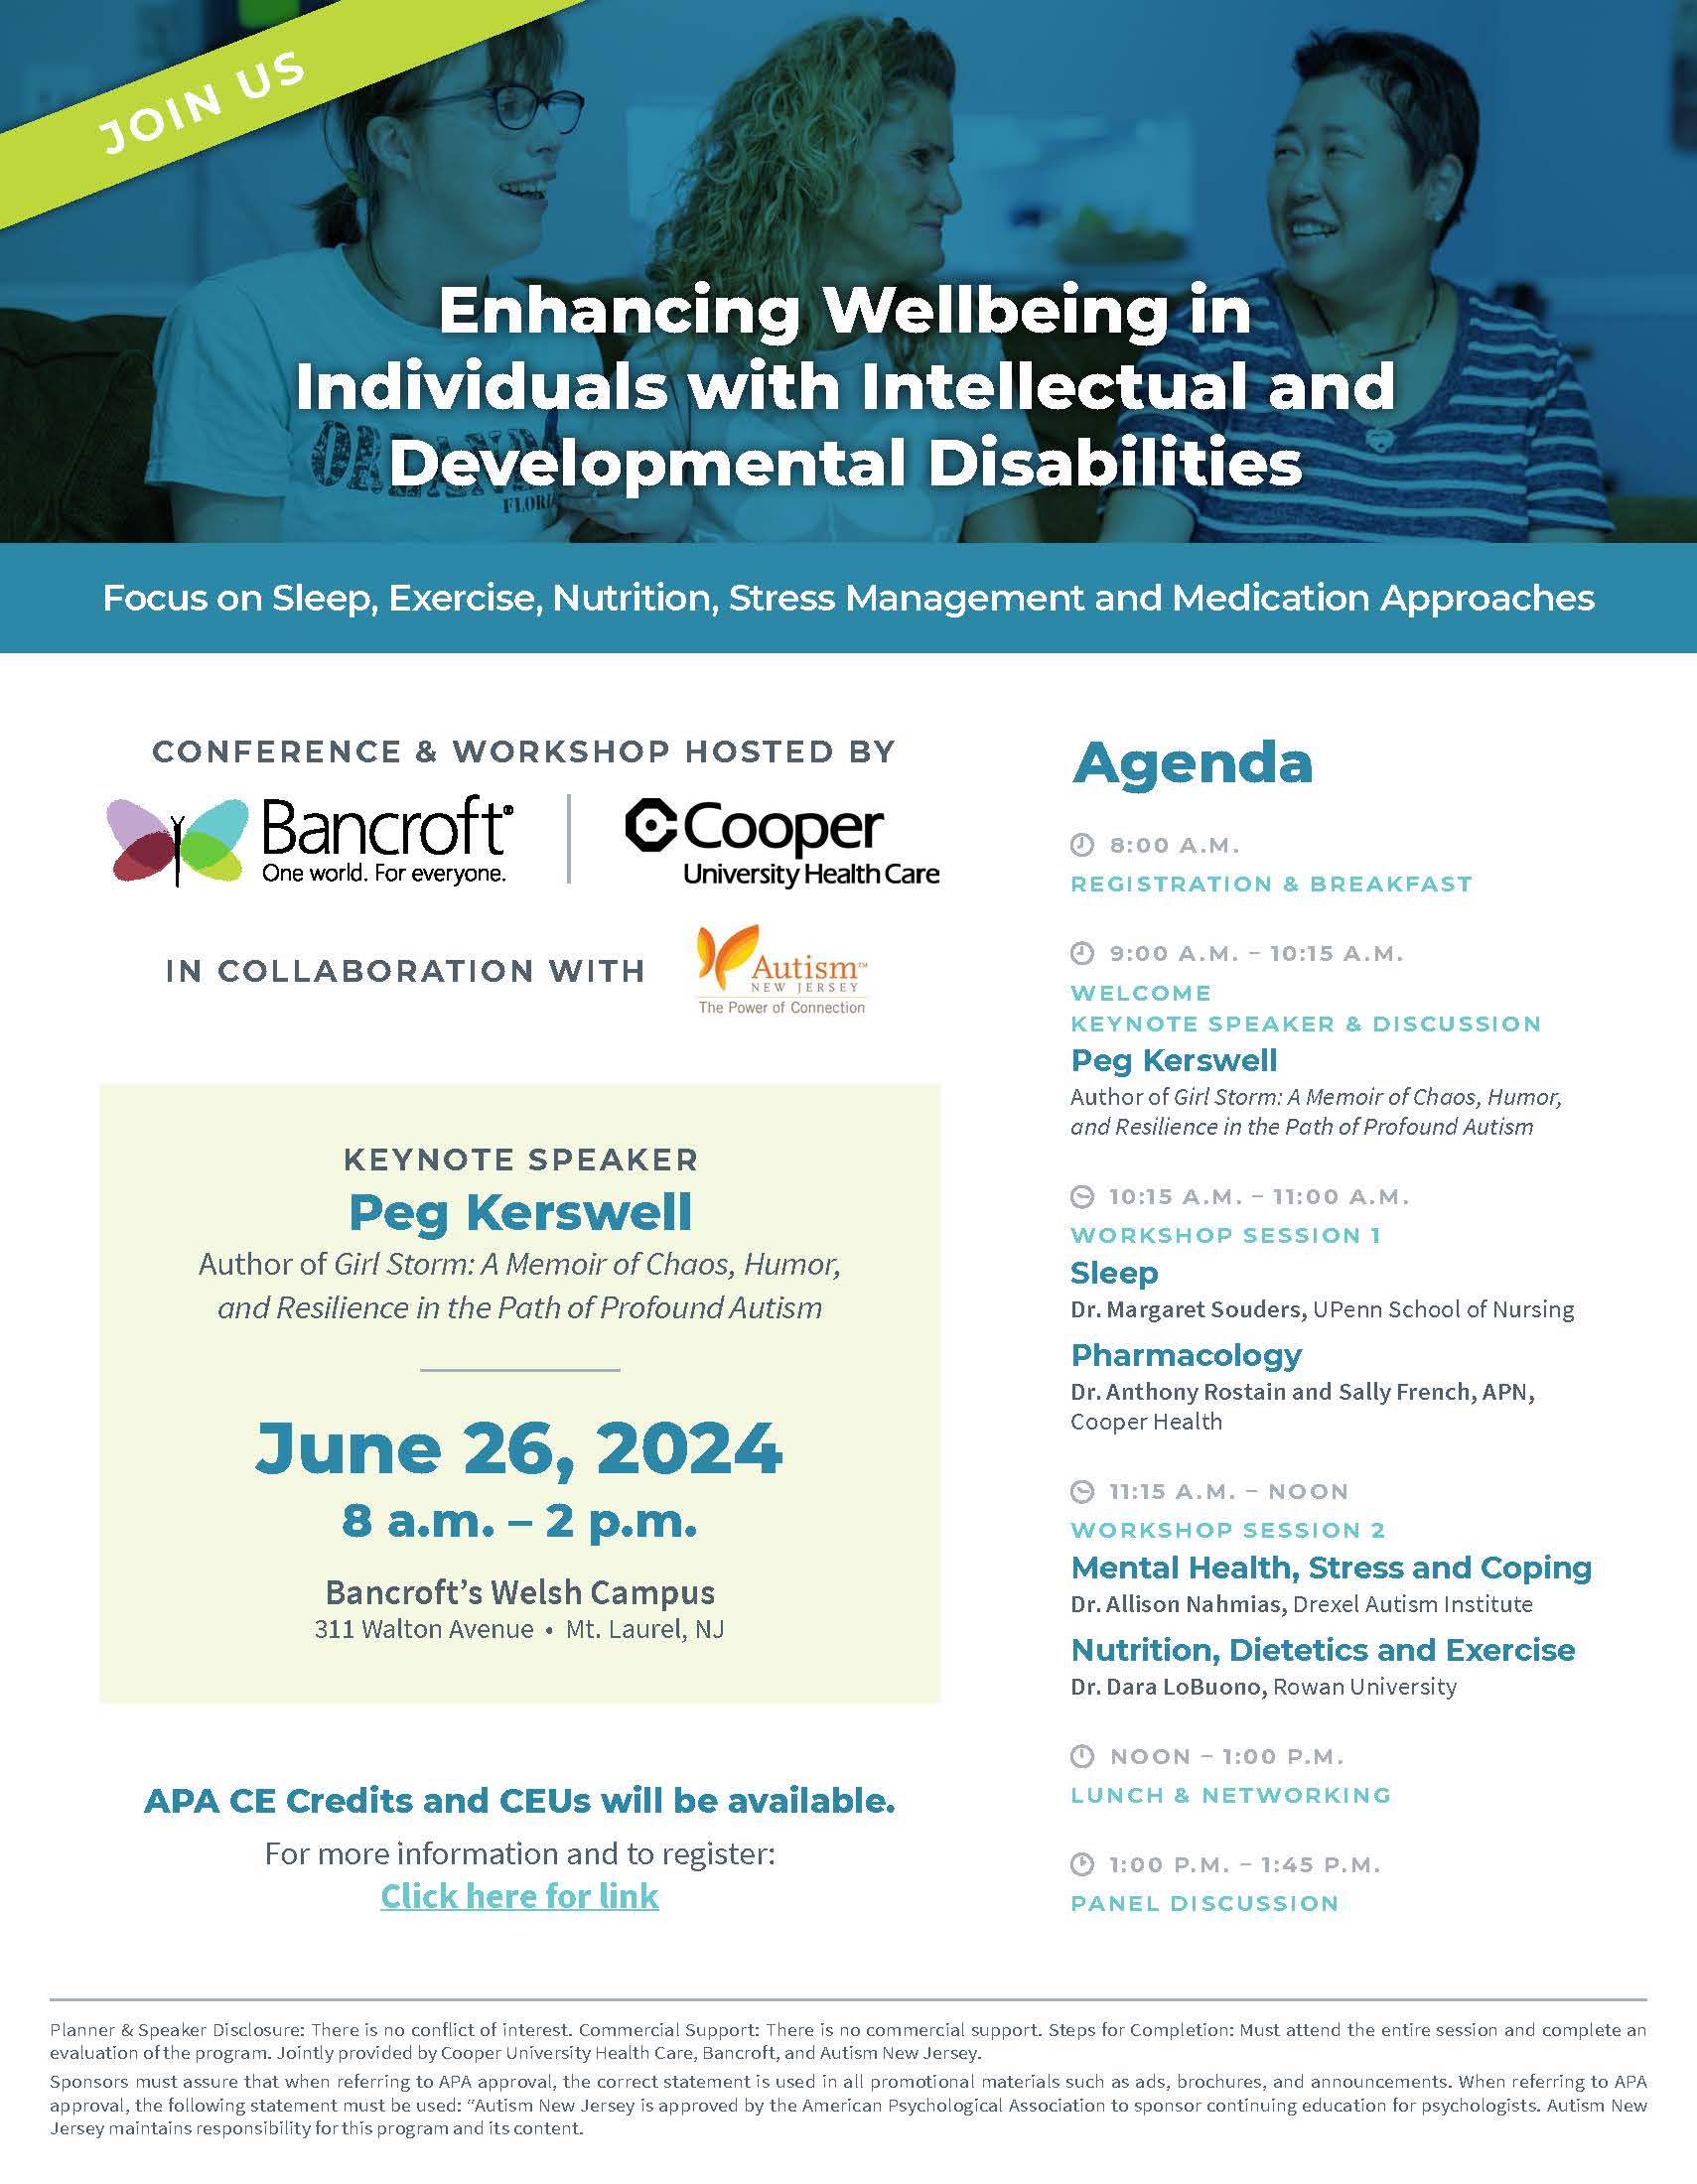 Flyer for Enhancing Wellbeing event